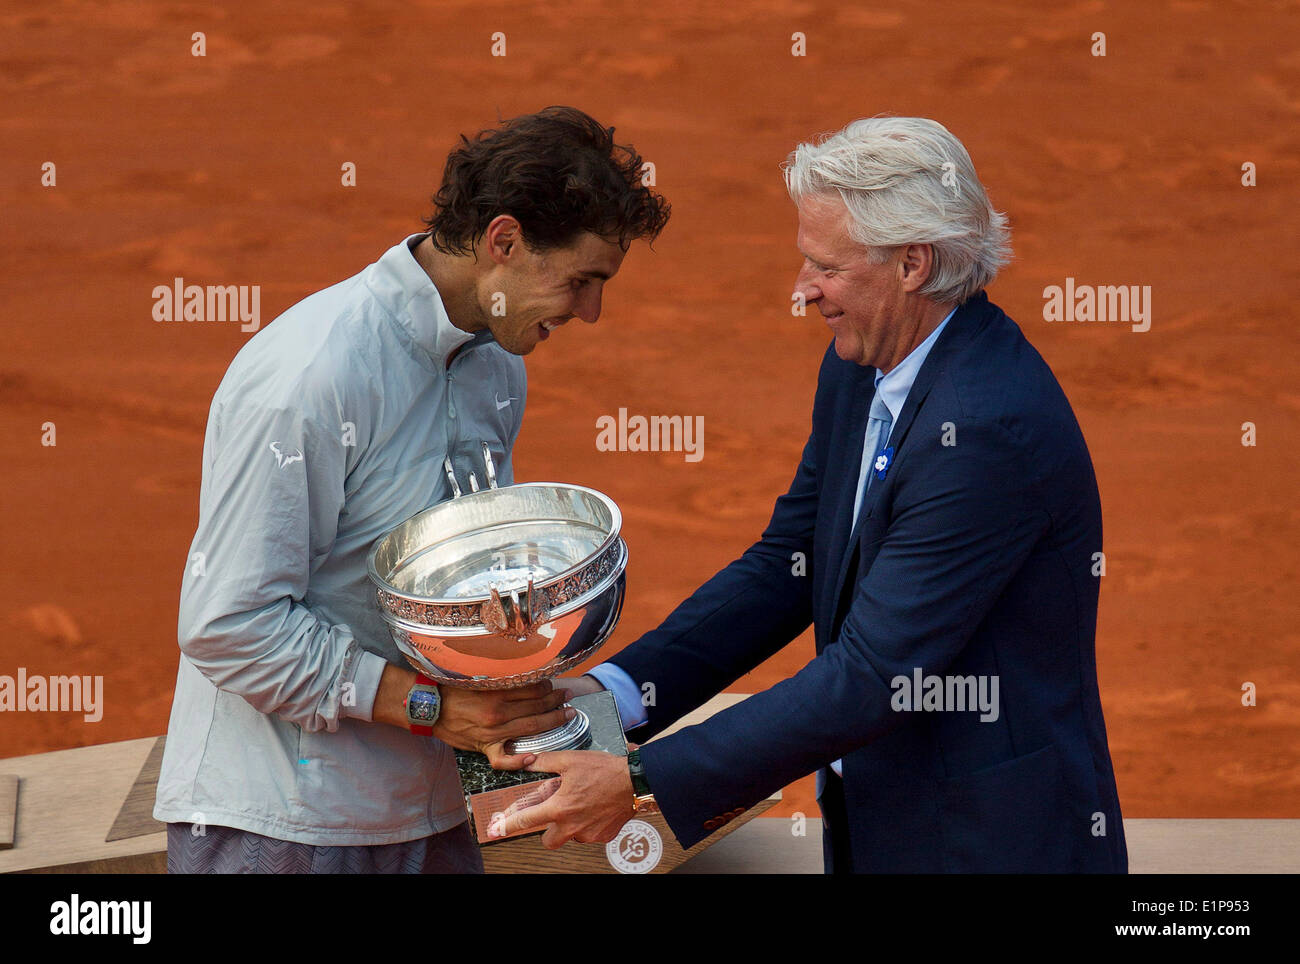 Paris, France. 8th June, 2014. Tennis, French Open, Roland Garros, Final men: Rafael Nadal (ESP) receives the trophy  out of the hands of former winner Bjorn Borg Photo:Tennisimages/Henk Koster/Alamy Live News Stock Photo